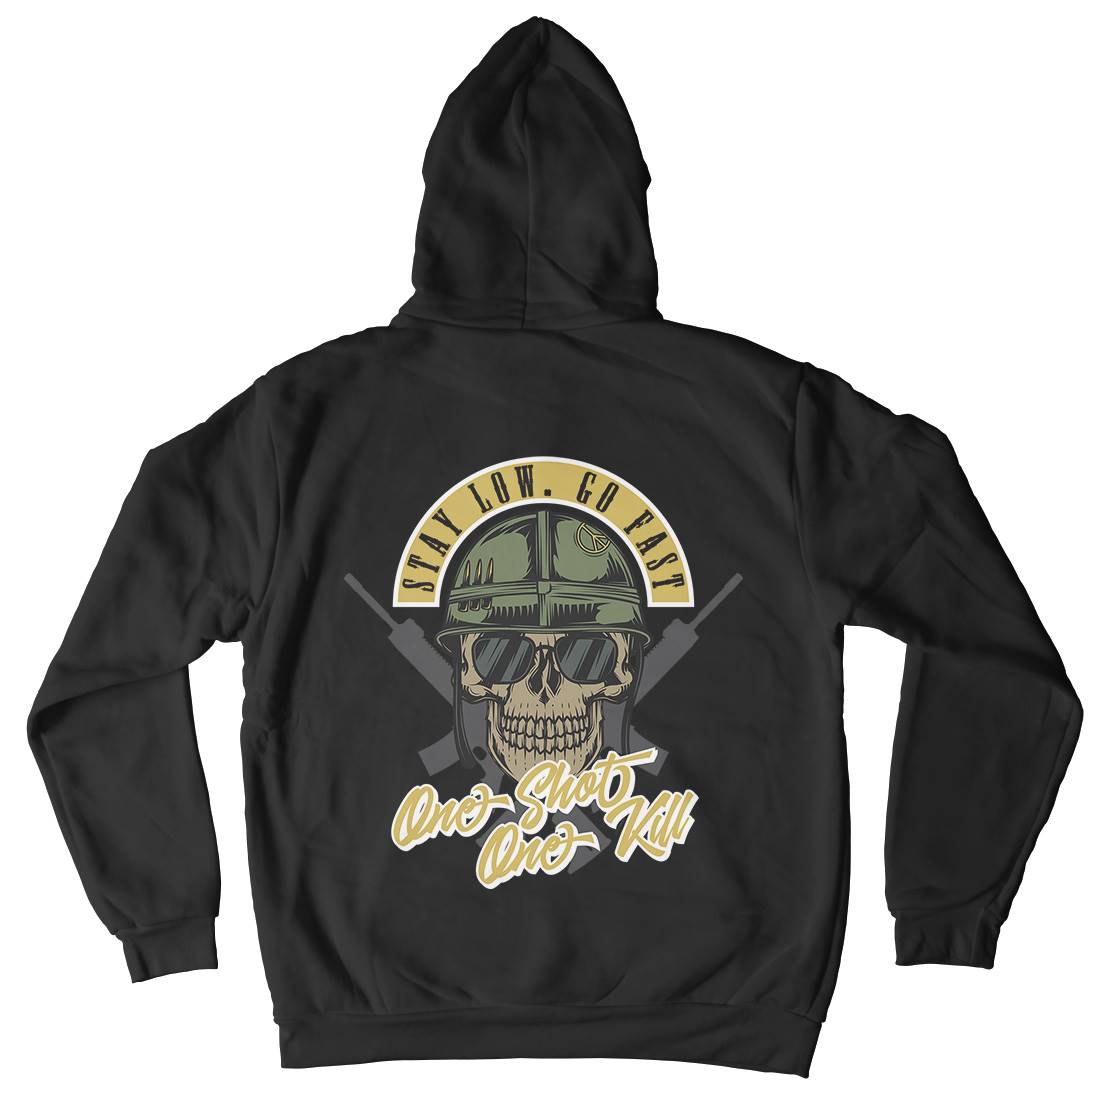 One Shoot Mens Hoodie With Pocket Army C885